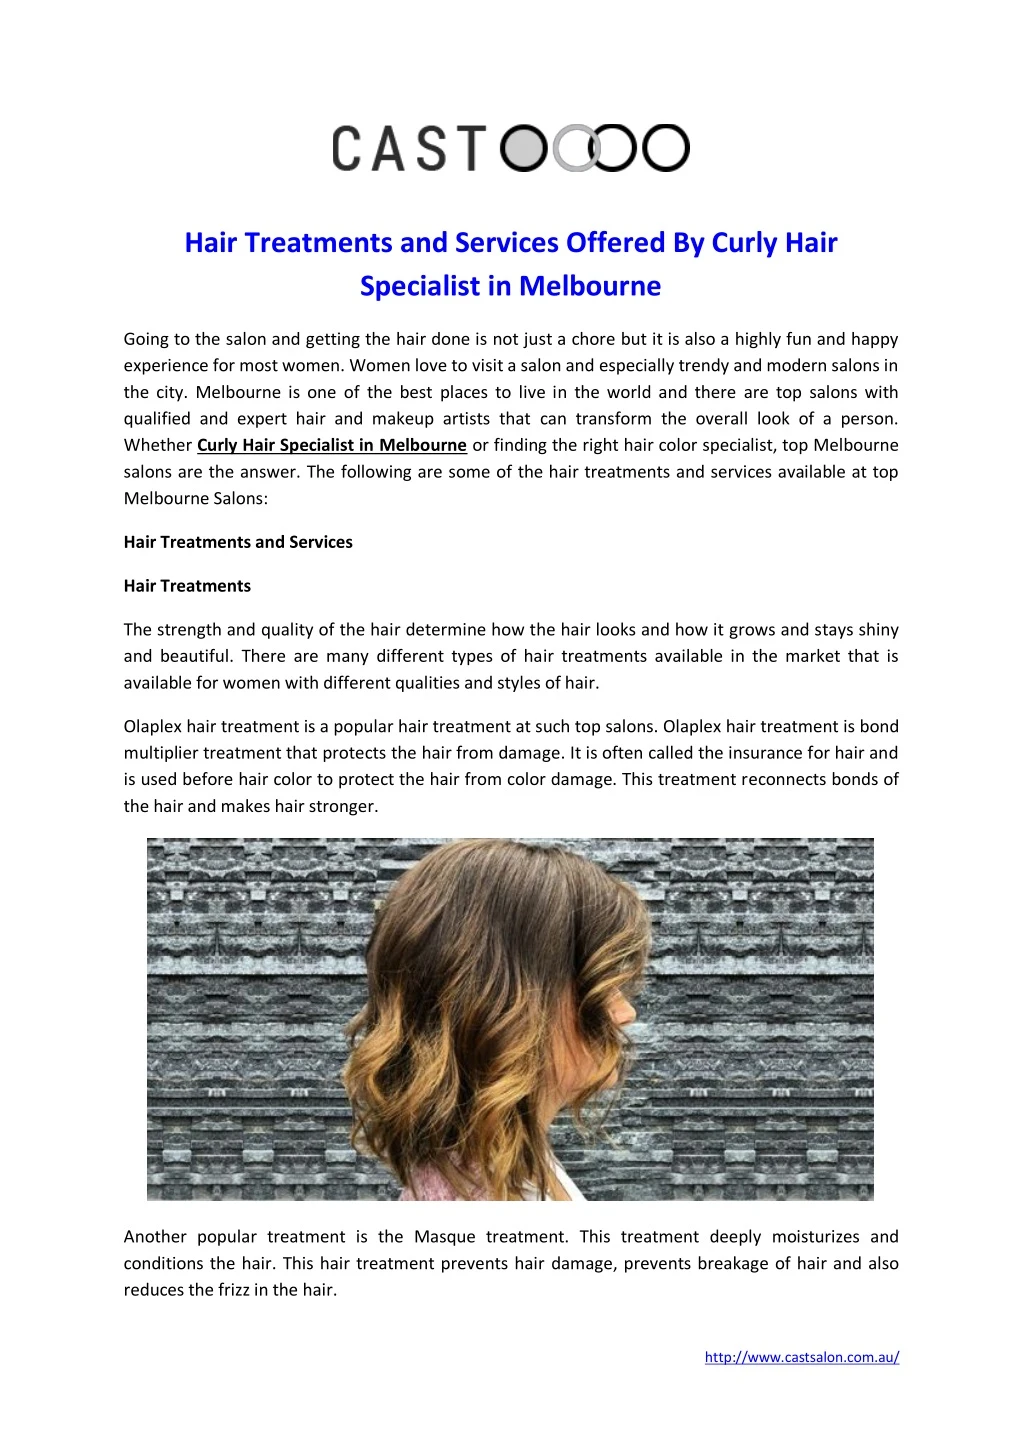 hair treatments and services offered by curly